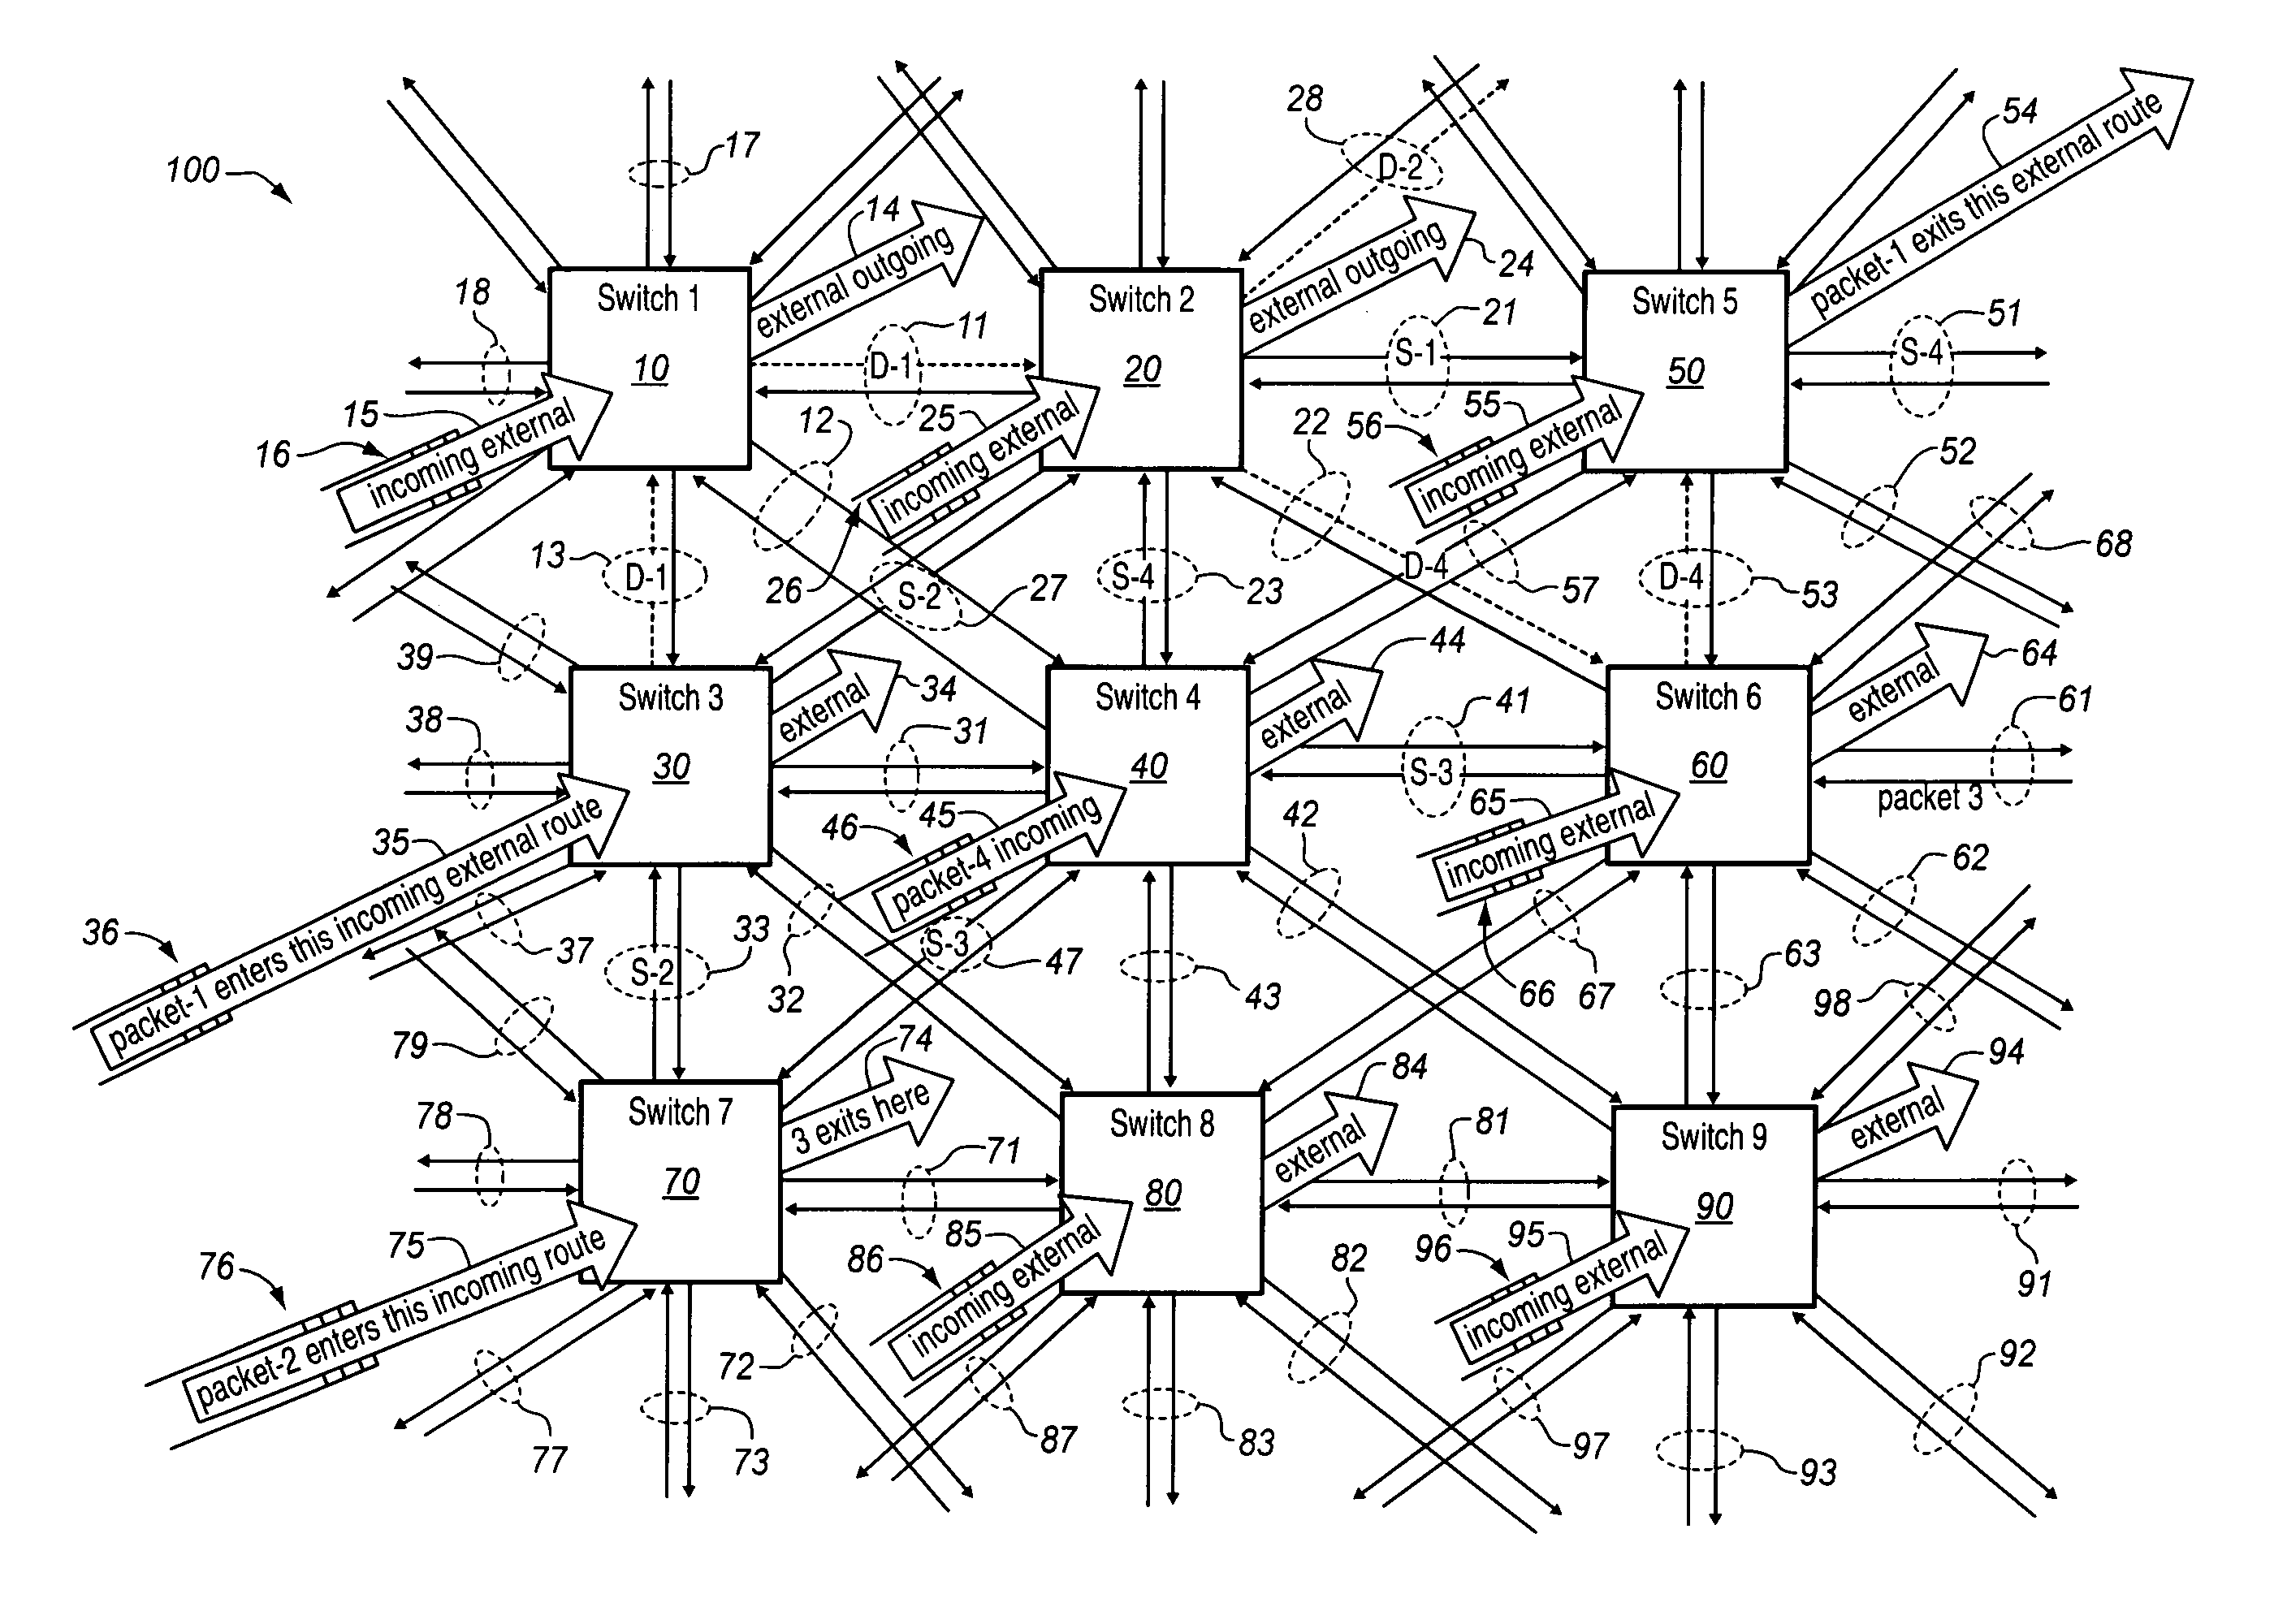 Packet-switching network with symmetrical topology and method of routing packets